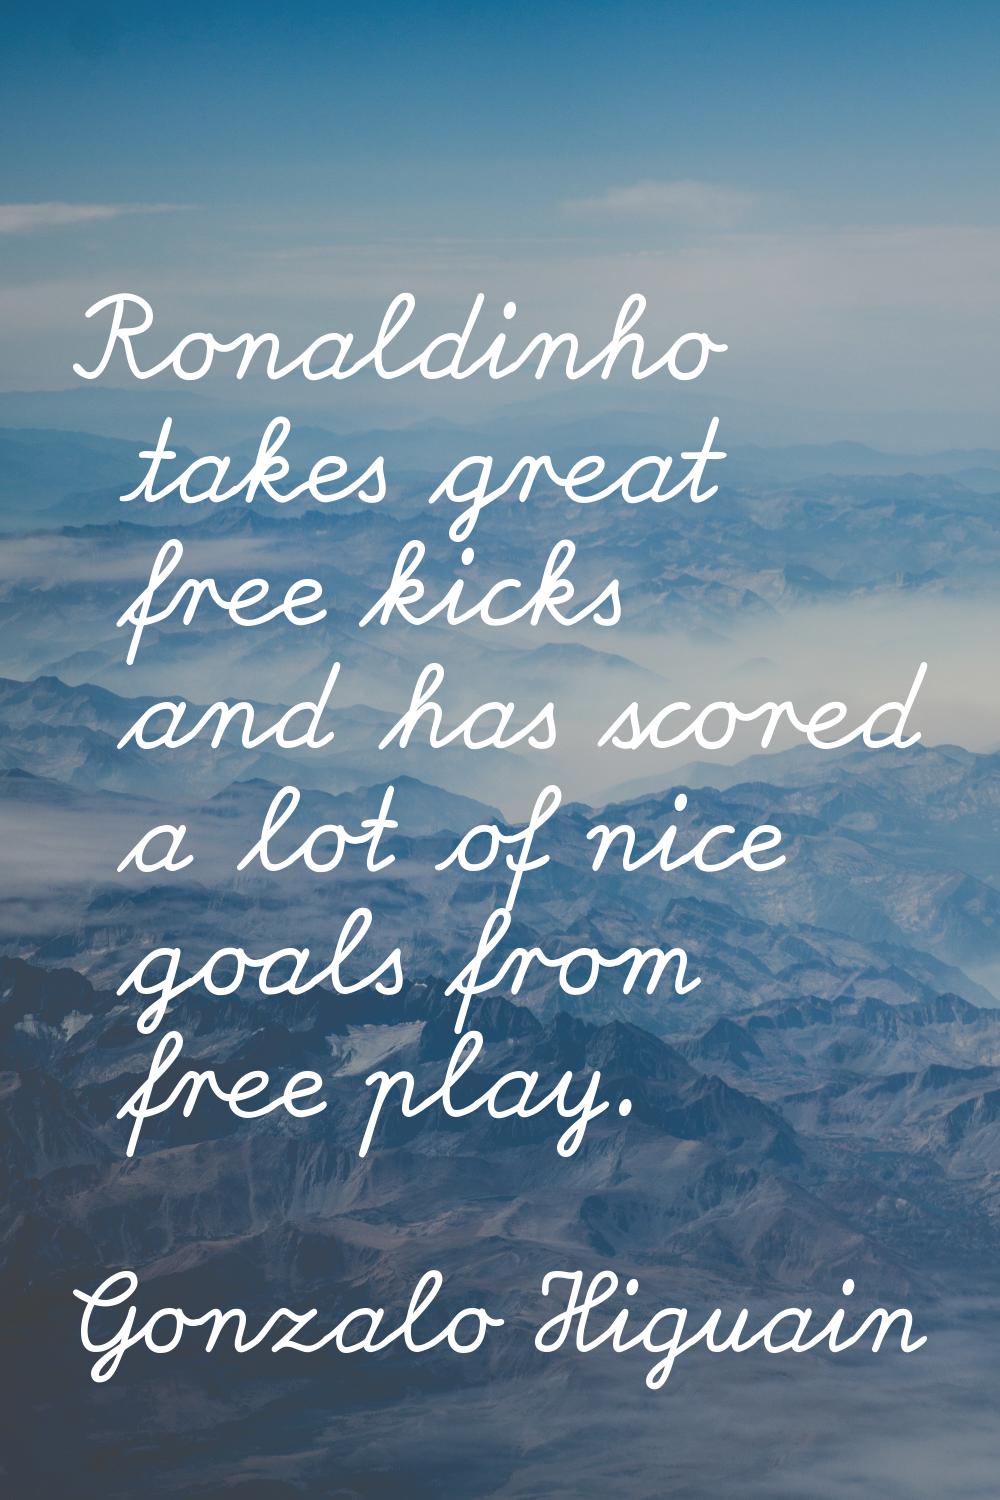 Ronaldinho takes great free kicks and has scored a lot of nice goals from free play.